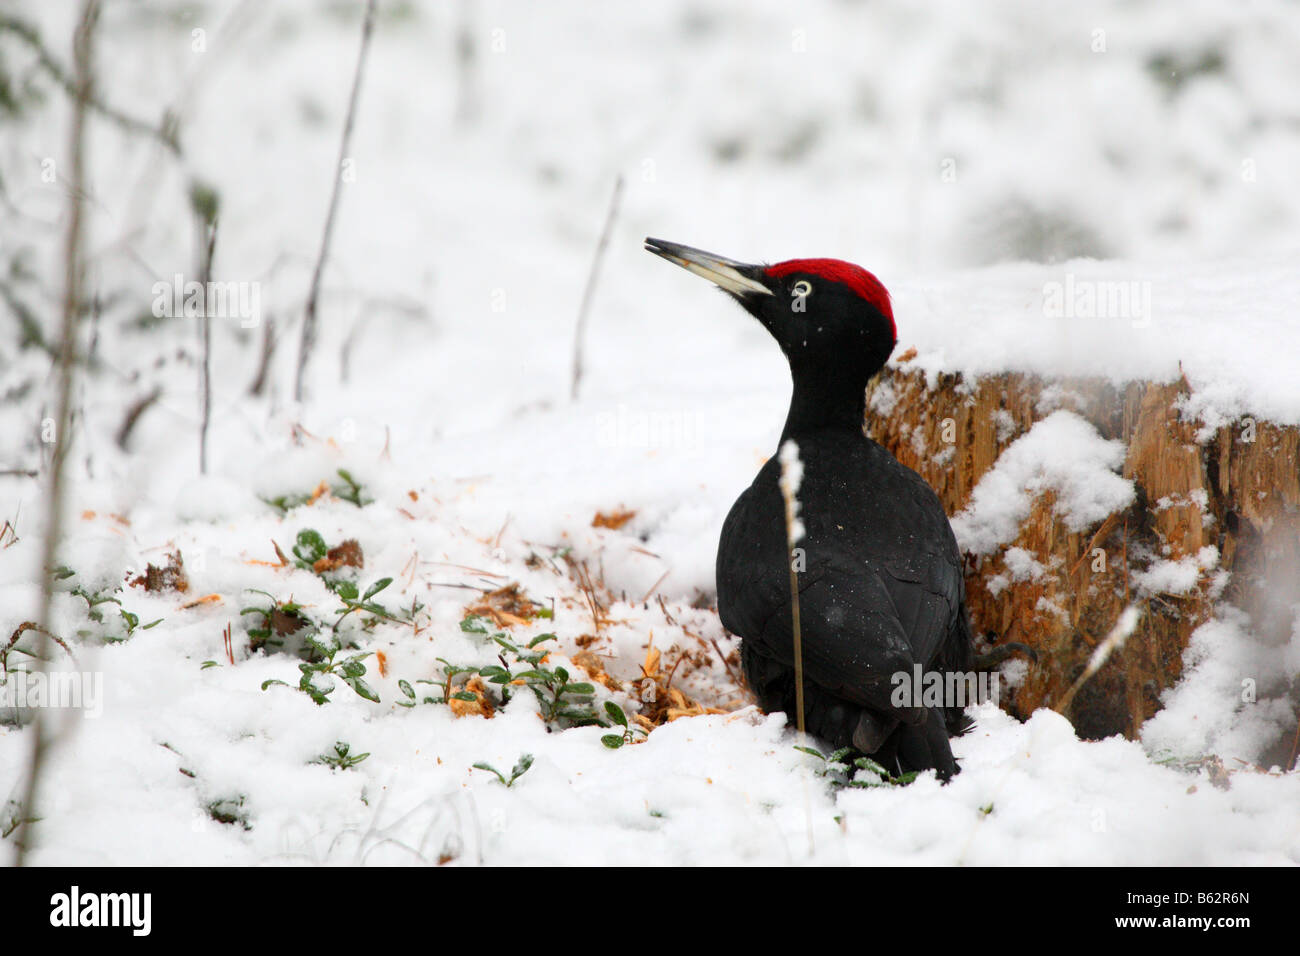 Black Woodpecker (Dryocopus martius) destroying tree stump while searching for insects.  searching for food. Stock Photo